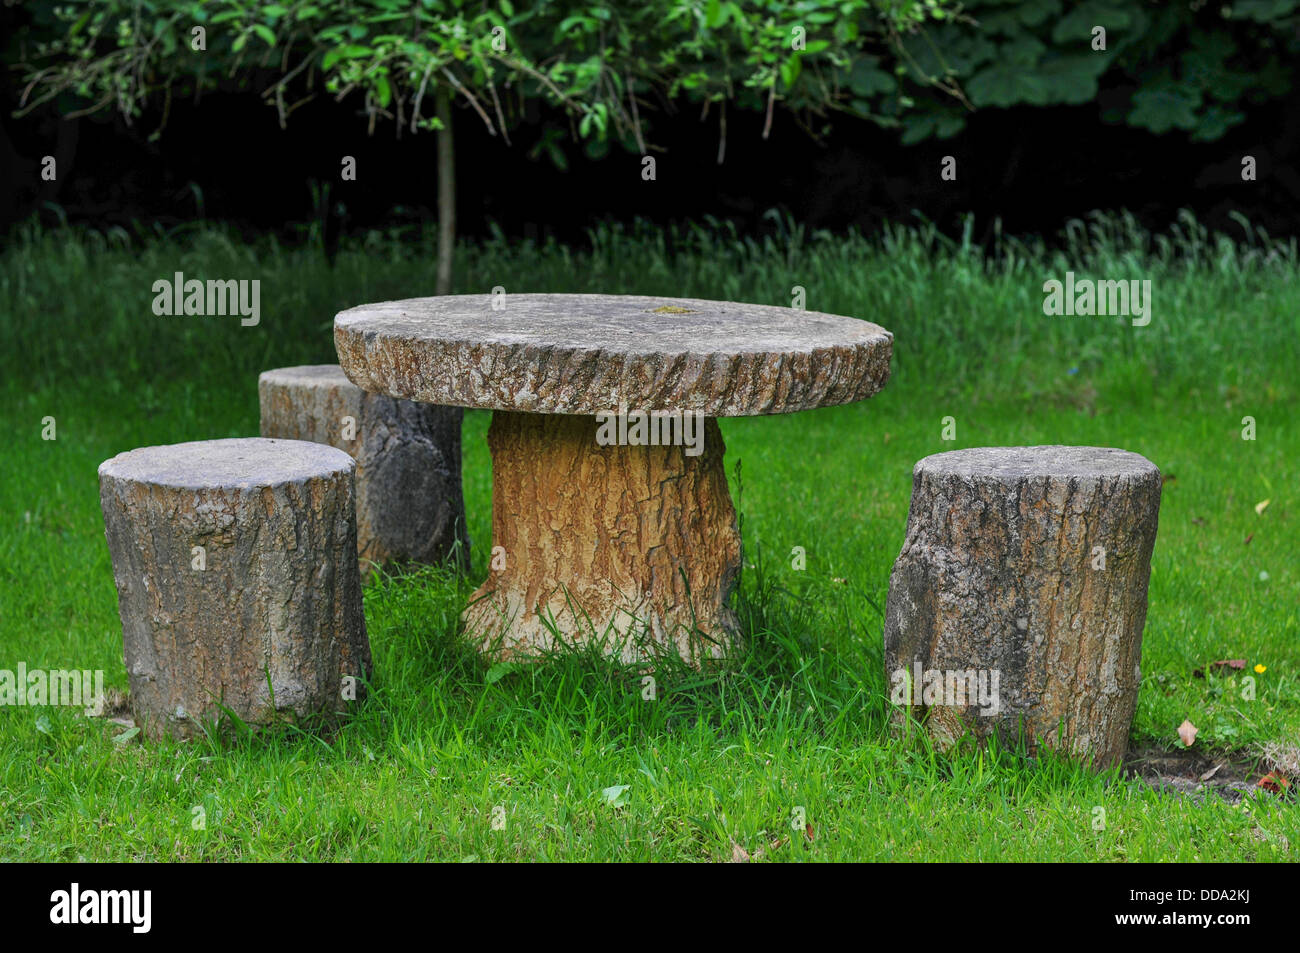 Wooden Seating in a Garden During Summer Stock Photo